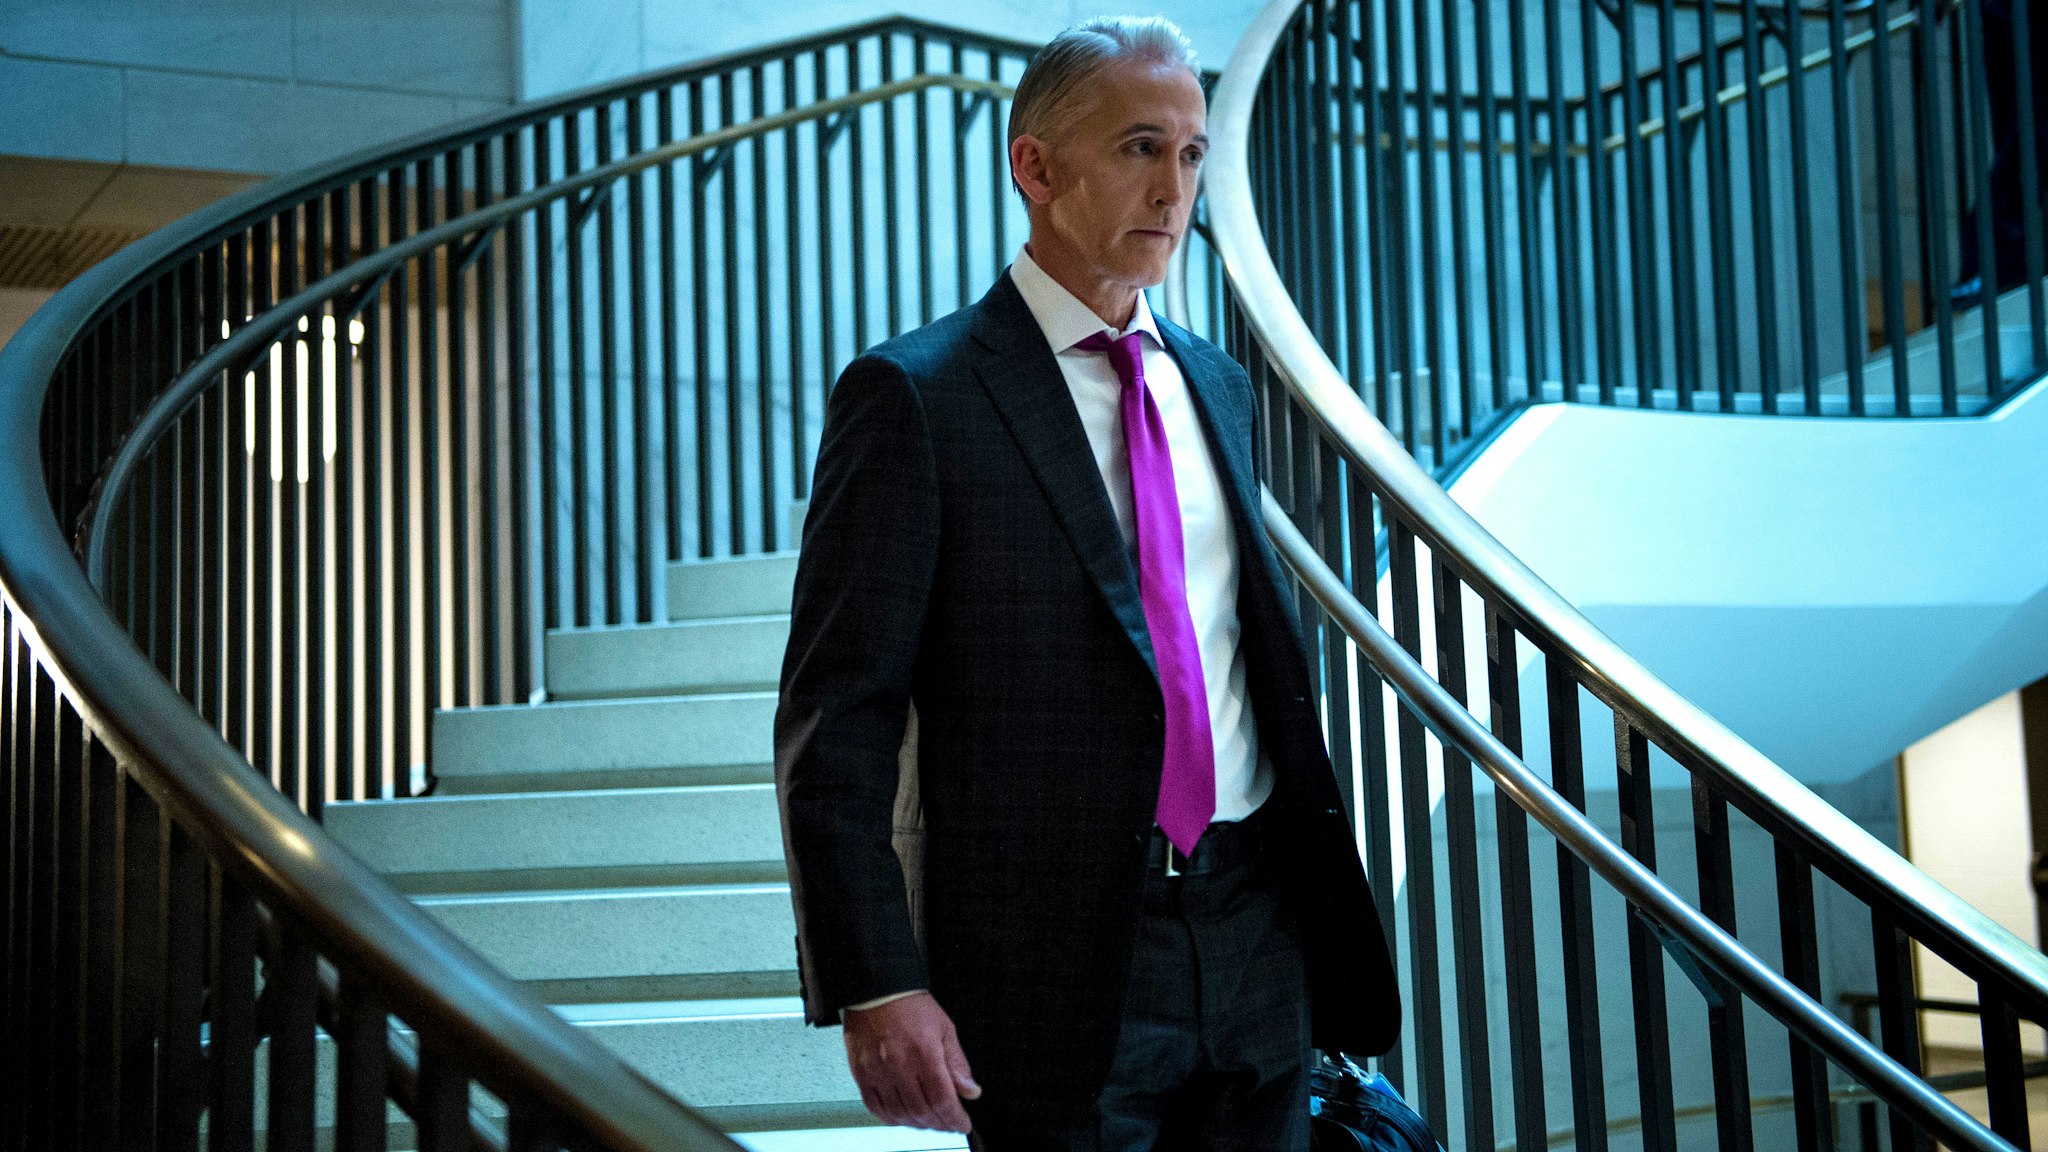 Rep. Trey Gowdy (R-SC) arrives for a closed session with Donald Trump Jr. before the House Intelligence Committee on Capitol Hill December 6, 2017 in Washington, DC.